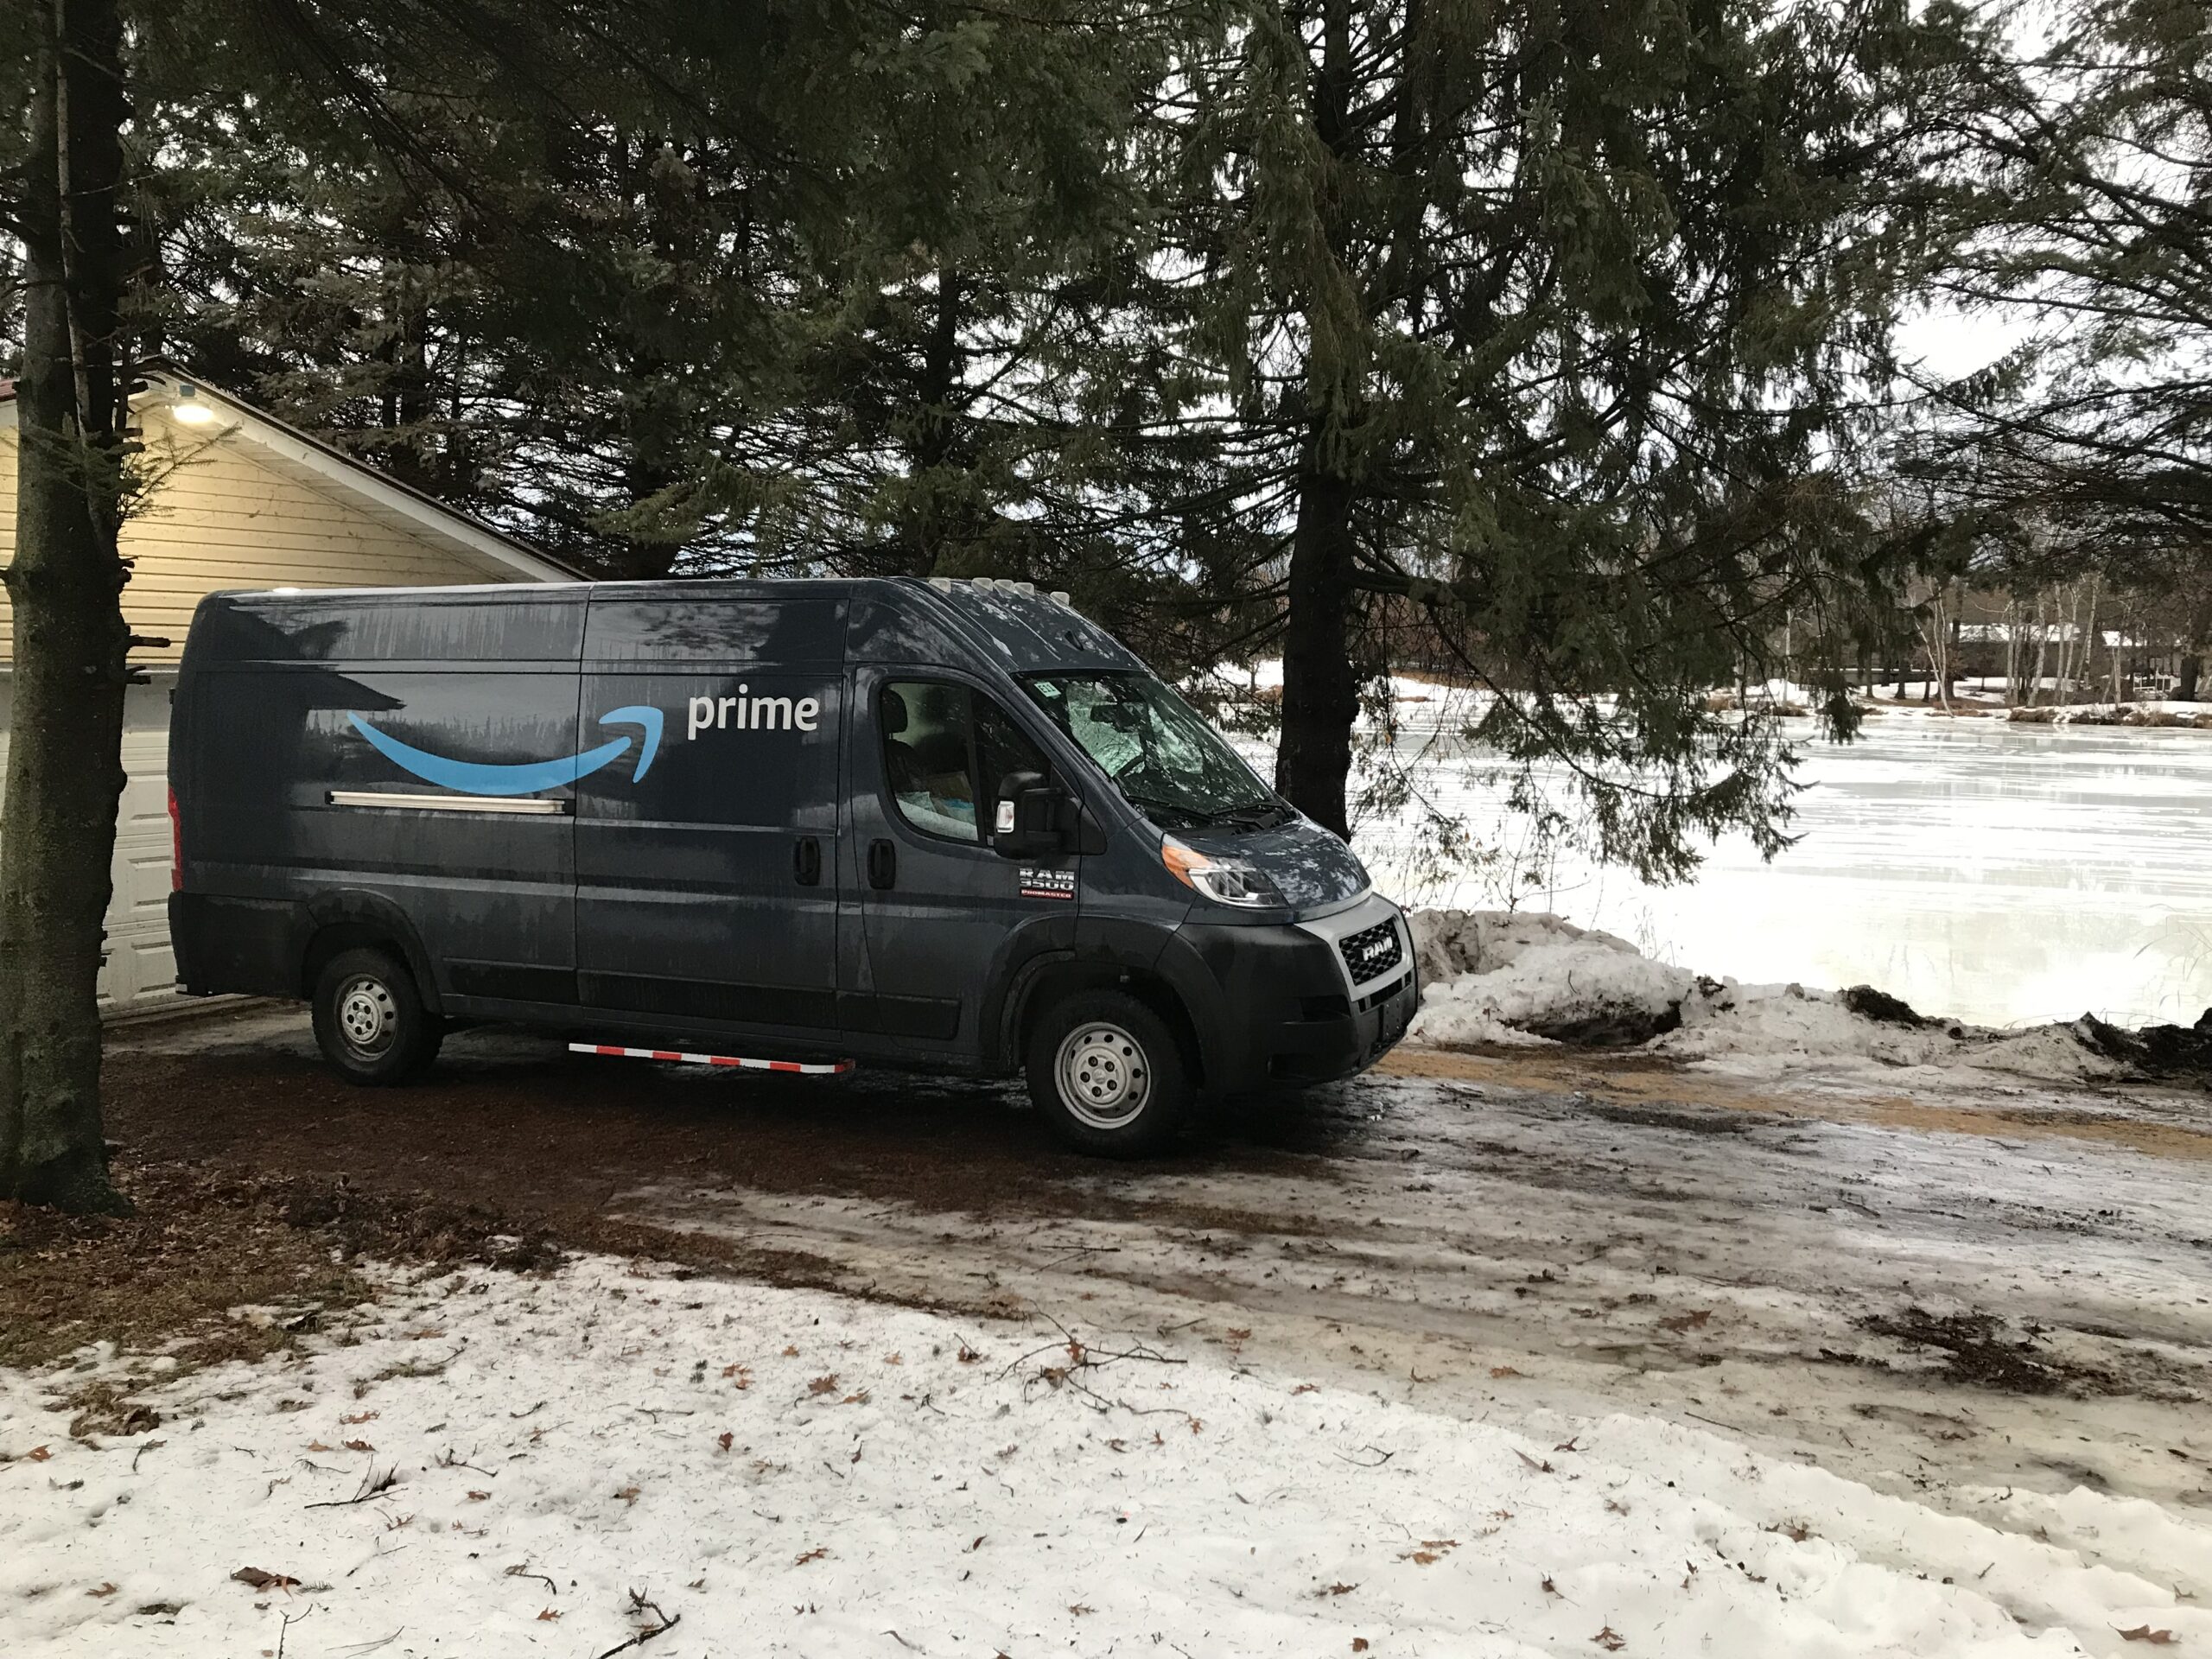 Photo of a stranded Amazon delivery van on an icy driveway